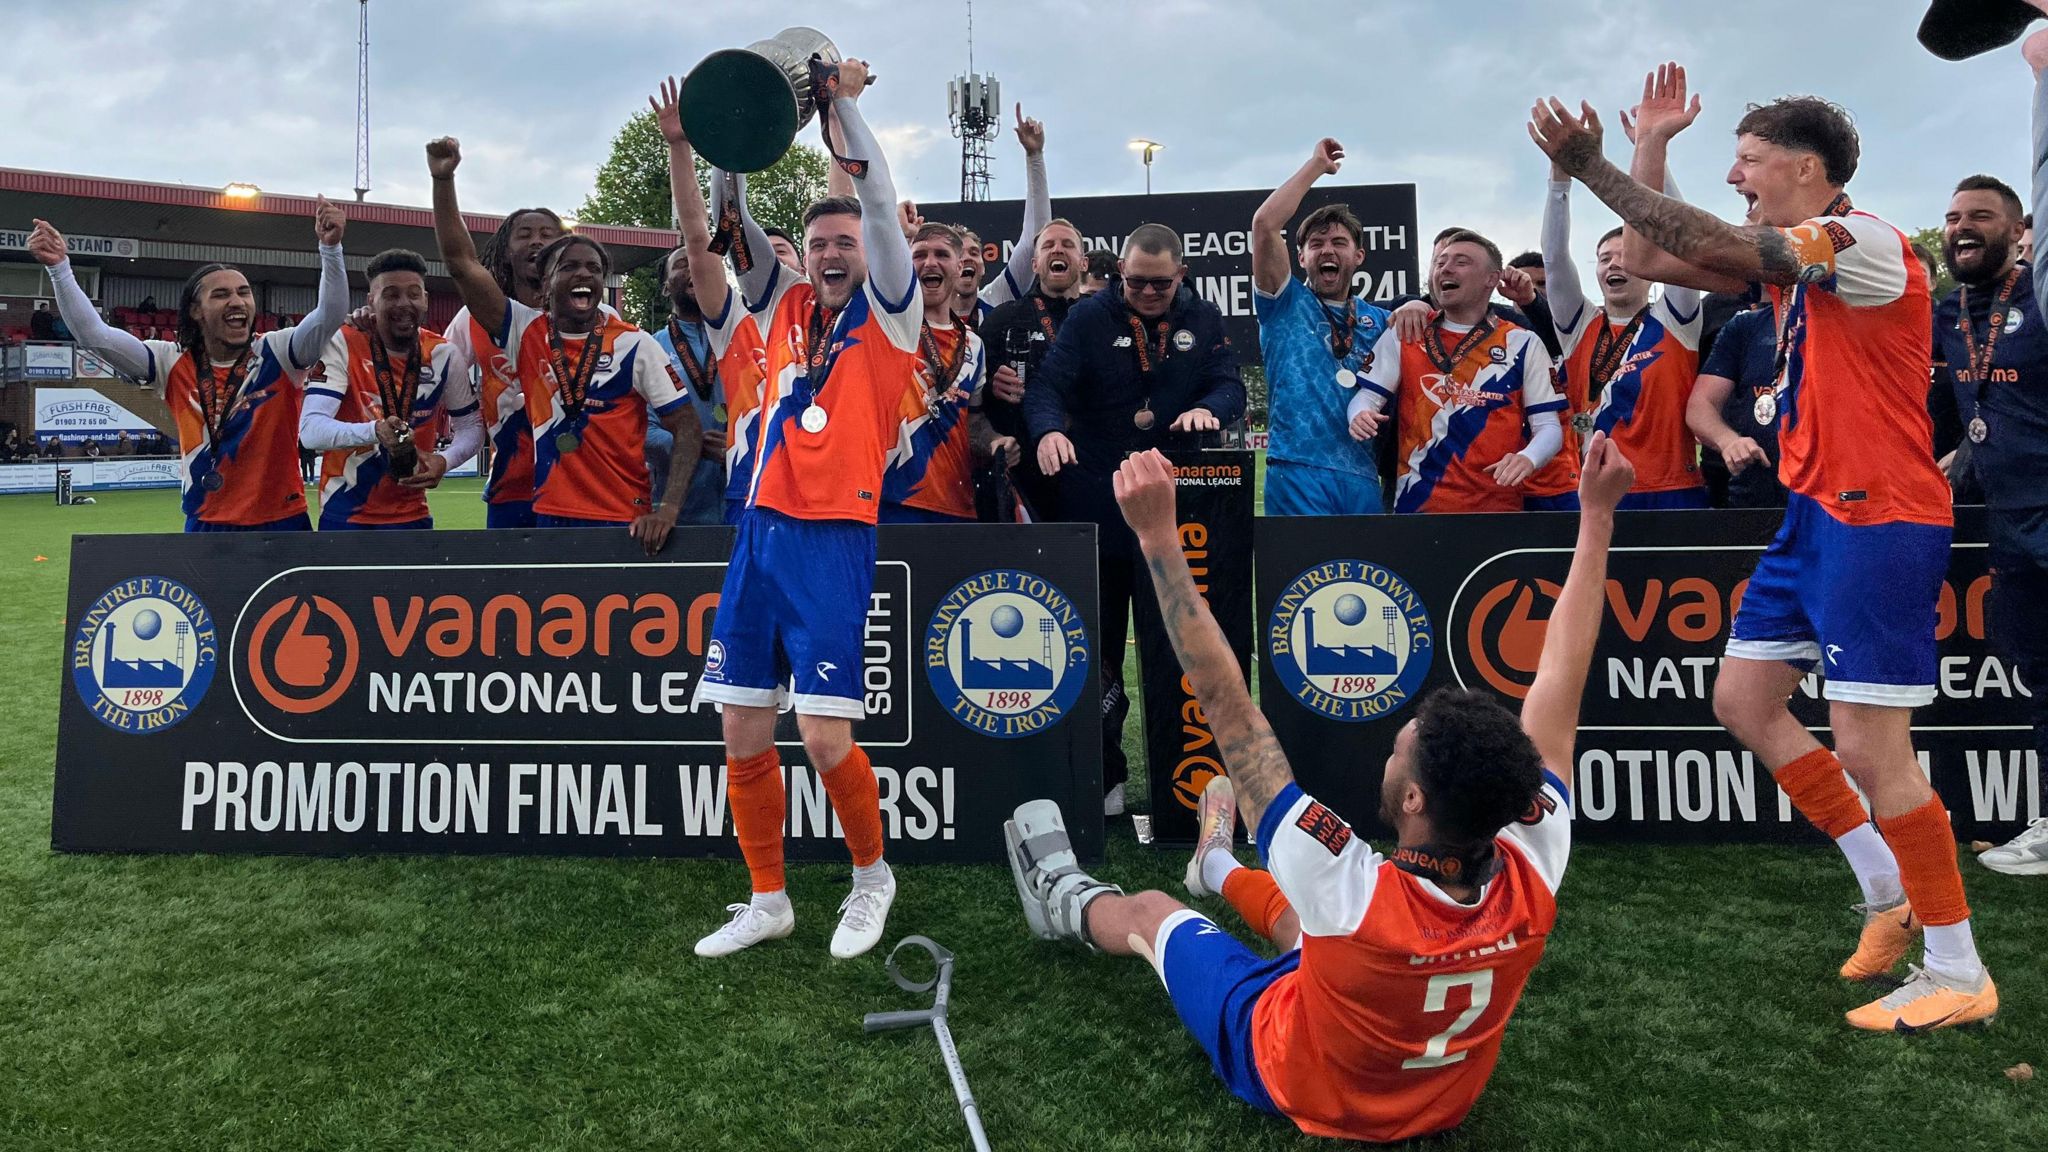 Braintree Town players celebrate promotion